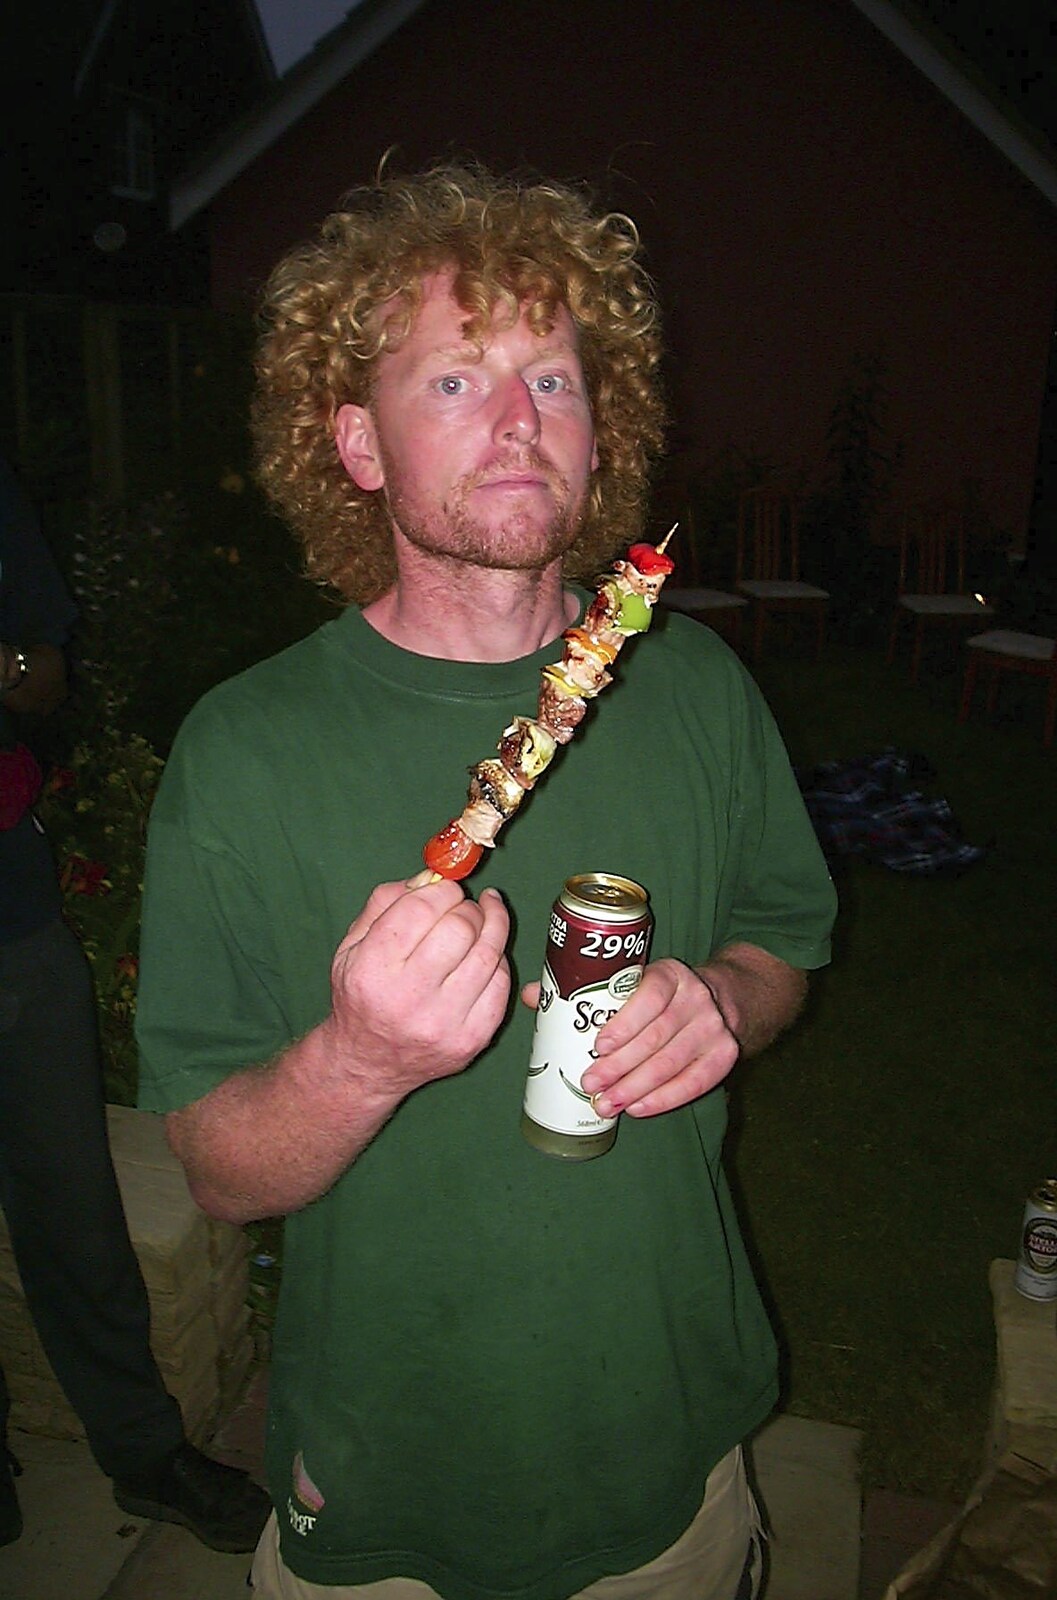 Wavy's got meat-on-a-stick from The BSCC in Debenham, and Bill's Housewarming Barbie, Yaxley, Suffolk - 31st July 2004